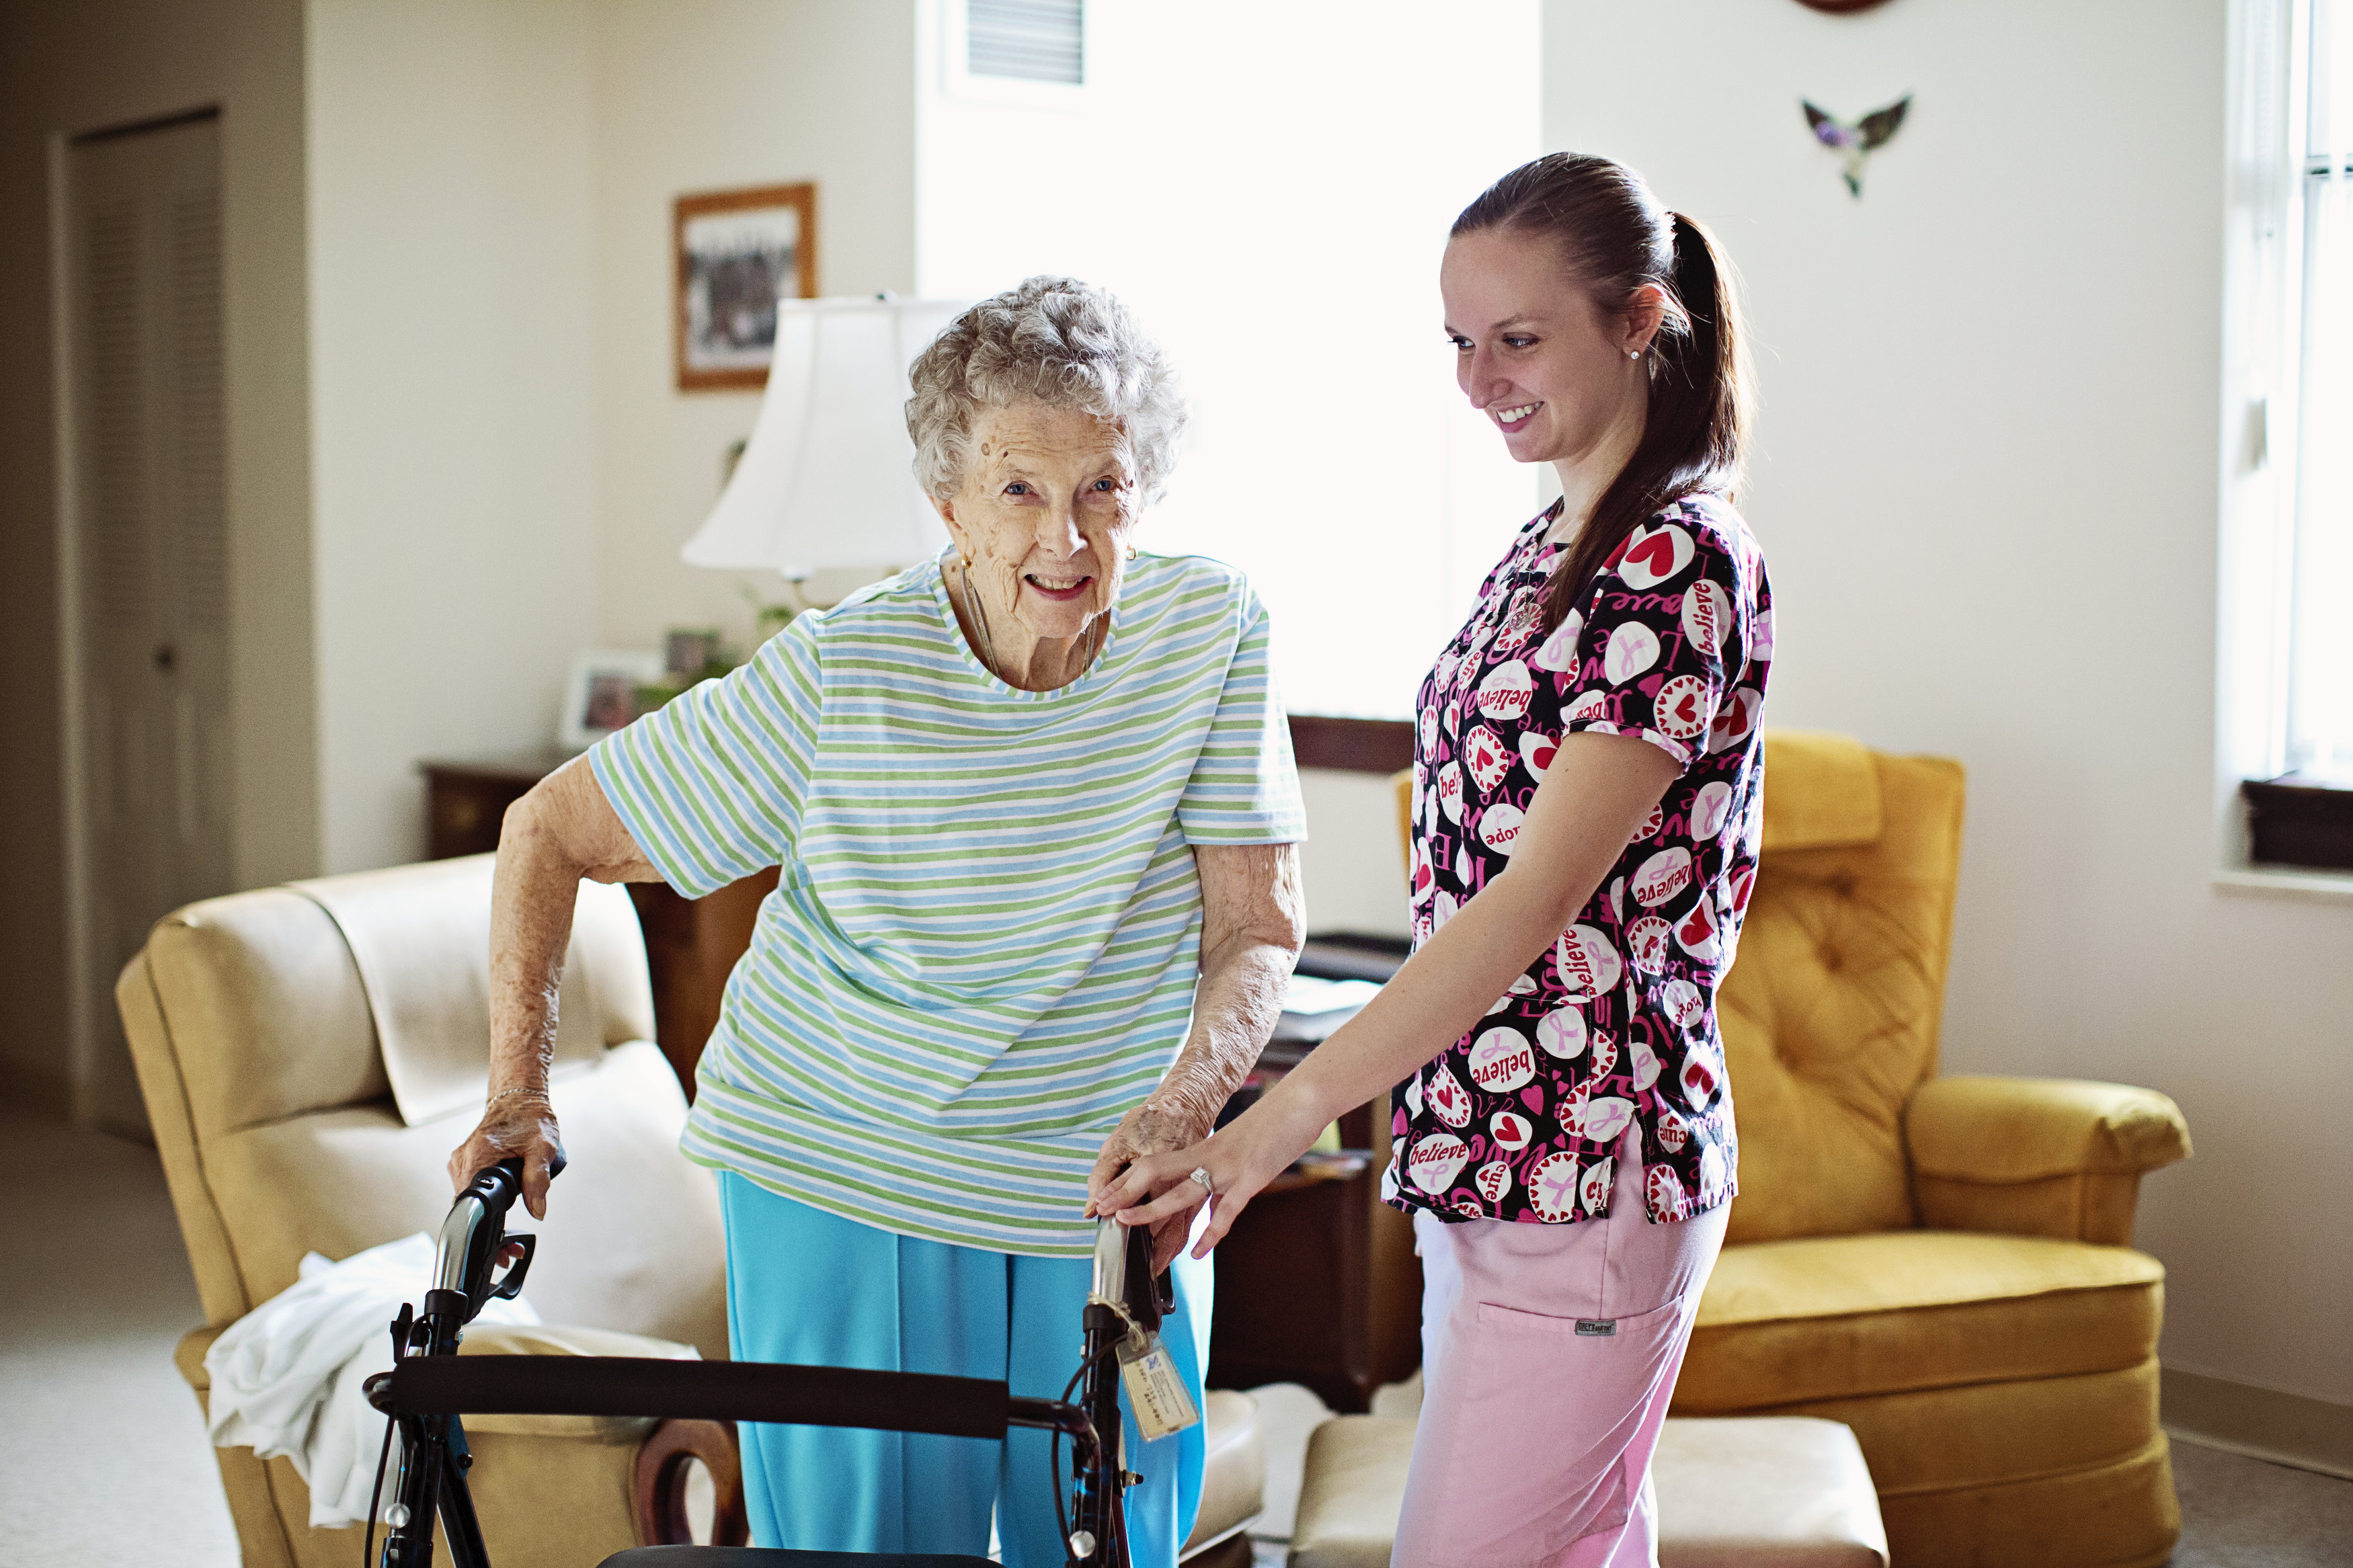 Jobs in home care for the elderly